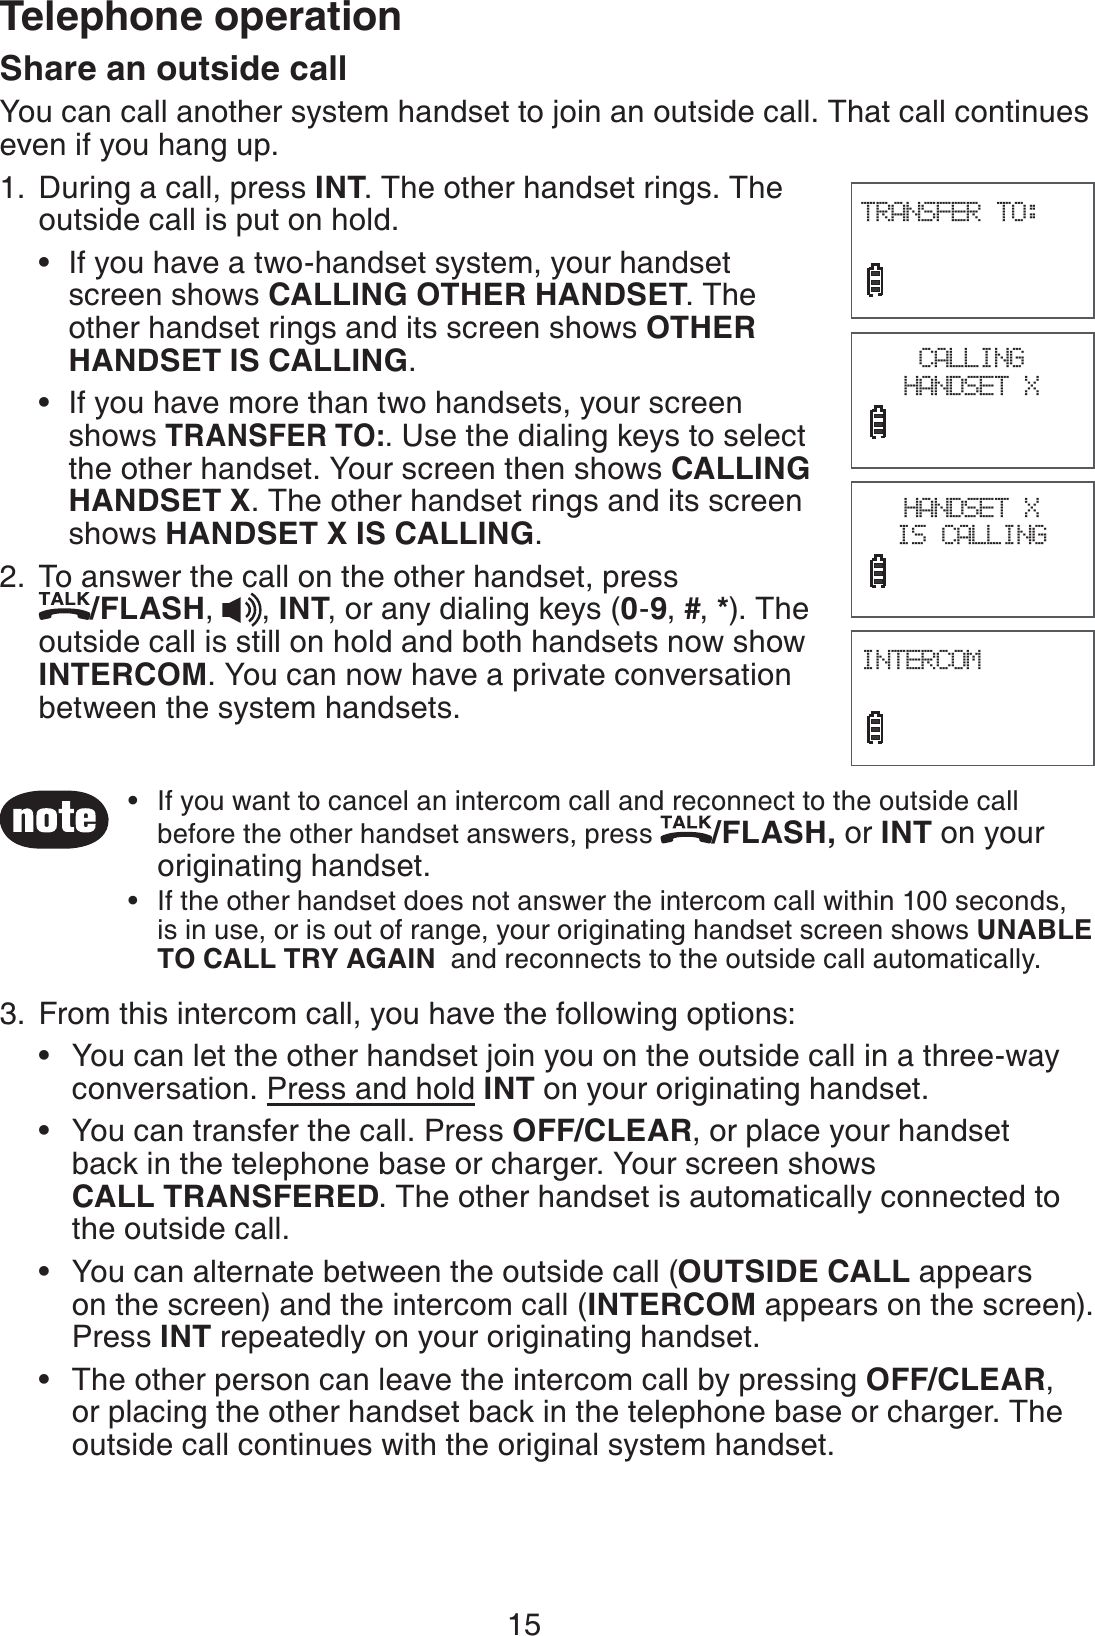 15Telephone operationShare an outside callYou can call another system handset to join an outside call. That call continues even if you hang up. During a call, press INT. The other handset rings. The outside call is put on hold.If you have a two-handset system, your handset    screen shows CALLING OTHER HANDSET. The    other handset rings and its screen shows OTHER    HANDSET IS CALLING.If you have more than two handsets, your screen   shows TRANSFER TO:. Use the dialing keys to select      the other handset. Your screen then shows CALLING     HANDSET X. The other handset rings and its screen     shows HANDSET X IS CALLING. To answer the call on the other handset, press    /FLASH,  , INT, or any dialing keys (0-9, #, *). The outside call is still on hold and both handsets now show INTERCOM. You can now have a private conversation between the system handsets.From this intercom call, you have the following options:You can let the other handset join you on the outside call in a three-way    conversation. Press and hold INT on your originating handset.You can transfer the call. Press OFF/CLEAR, or place your handset    back in the telephone base or charger. Your screen shows     CALL TRANSFERED. The other handset is automatically connected to    the outside call.You can alternate between the outside call (OUTSIDE CALL appears    on the screen) and the intercom call (INTERCOM appears on the screen).   Press INT repeatedly on your originating handset.The other person can leave the intercom call by pressing OFF/CLEAR,    or placing the other handset back in the telephone base or charger. The    outside call continues with the original system handset.1.••2.3.••••CALLING HANDSET XINTERCOM                             TRANSFER TO:                             HANDSET X IS CALLINGIf you want to cancel an intercom call and reconnect to the outside call before the other handset answers, press /FLASH, or INT on your originating handset.If the other handset does not answer the intercom call within 100 seconds, is in use, or is out of range, your originating handset screen shows UNABLE TO CALL TRY AGAIN  and reconnects to the outside call automatically.••